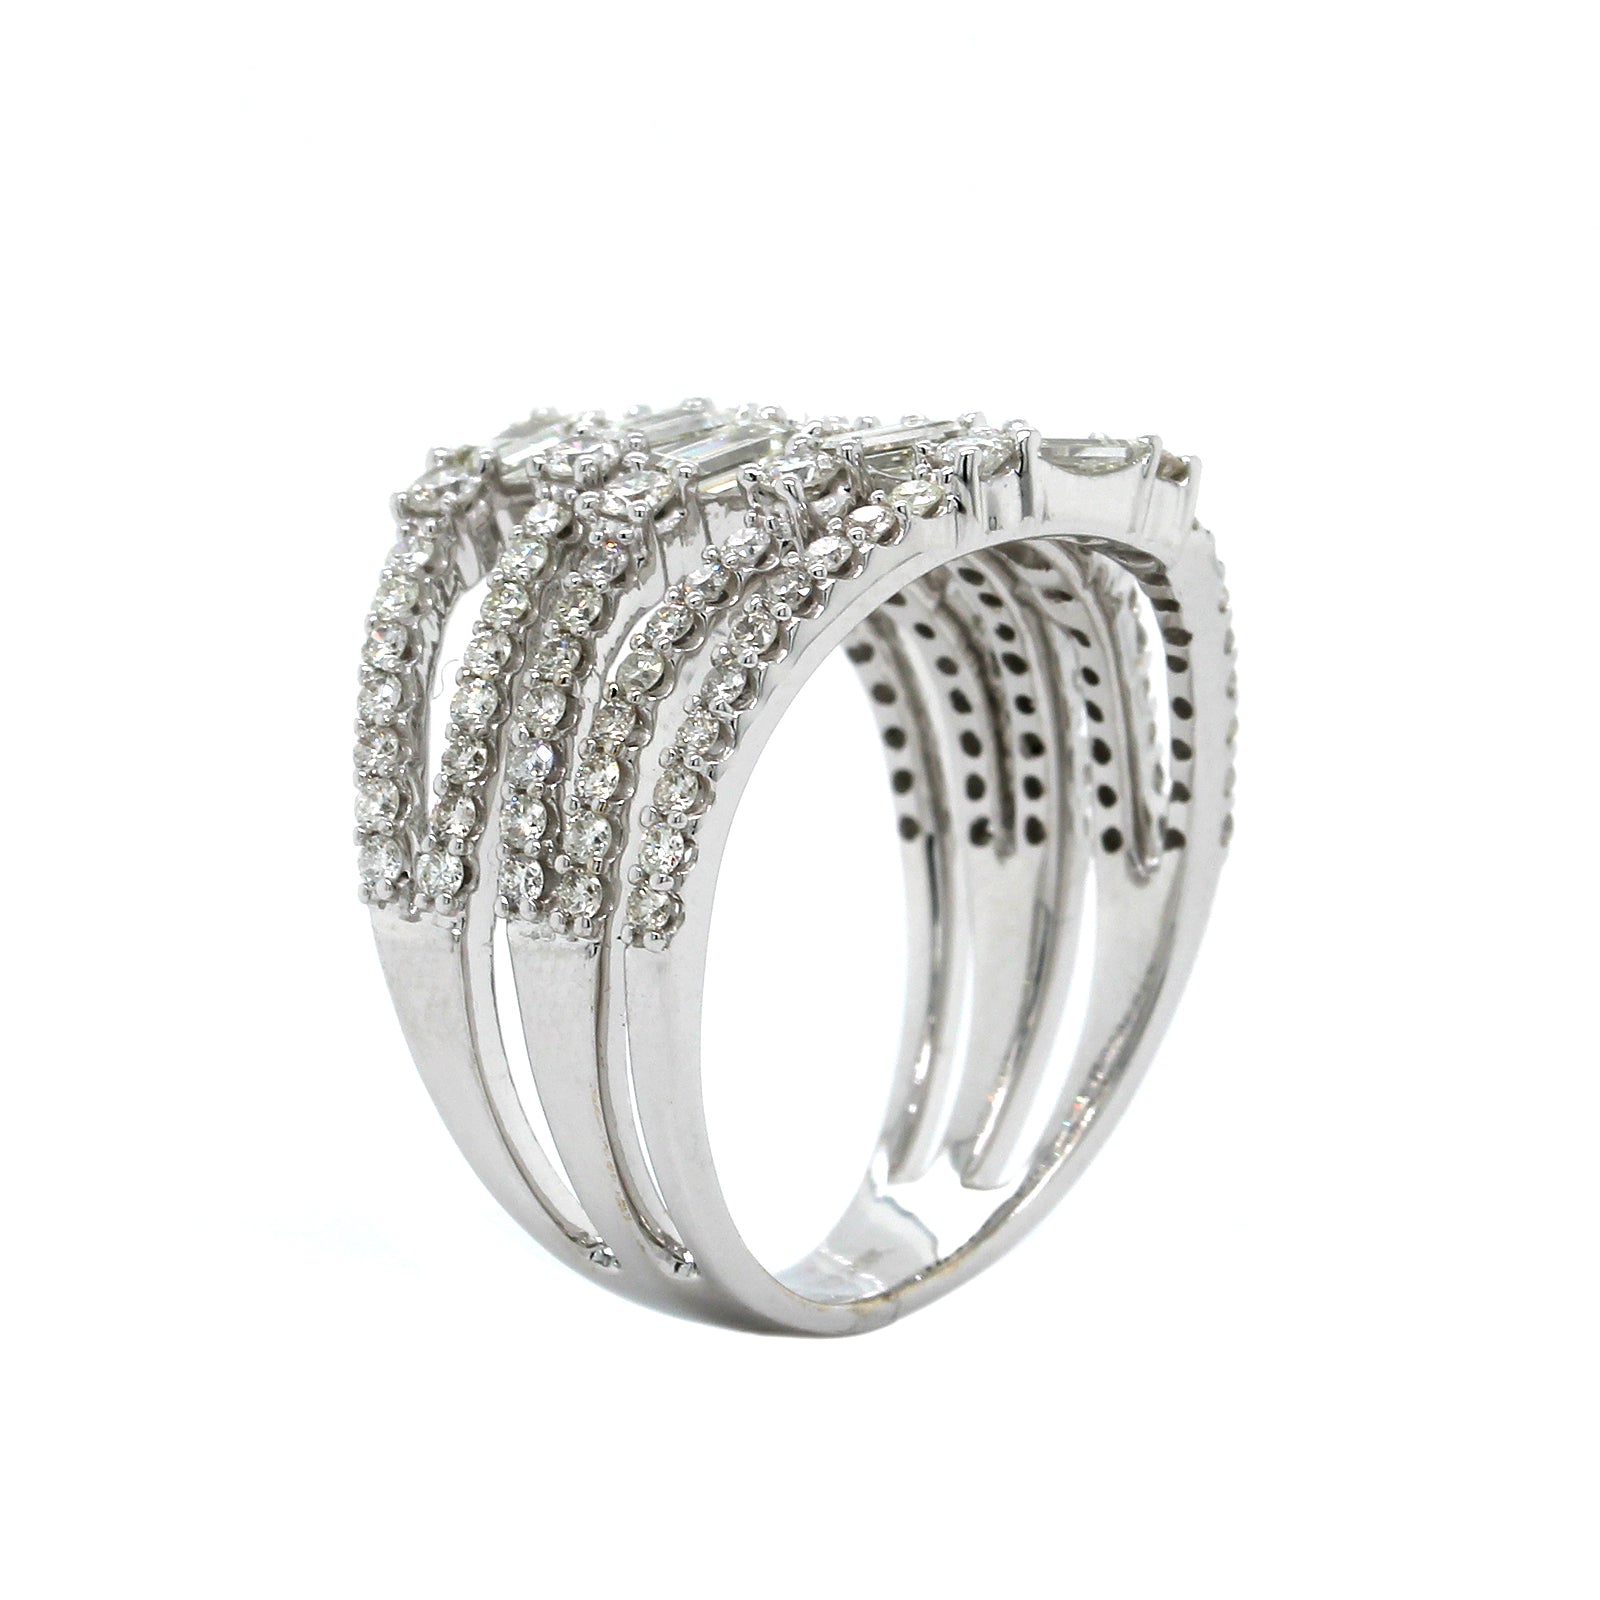 14K White Gold 5 Row Round and Baguette Wave Diamond Ring, 14k white gold, Long's Jewelers